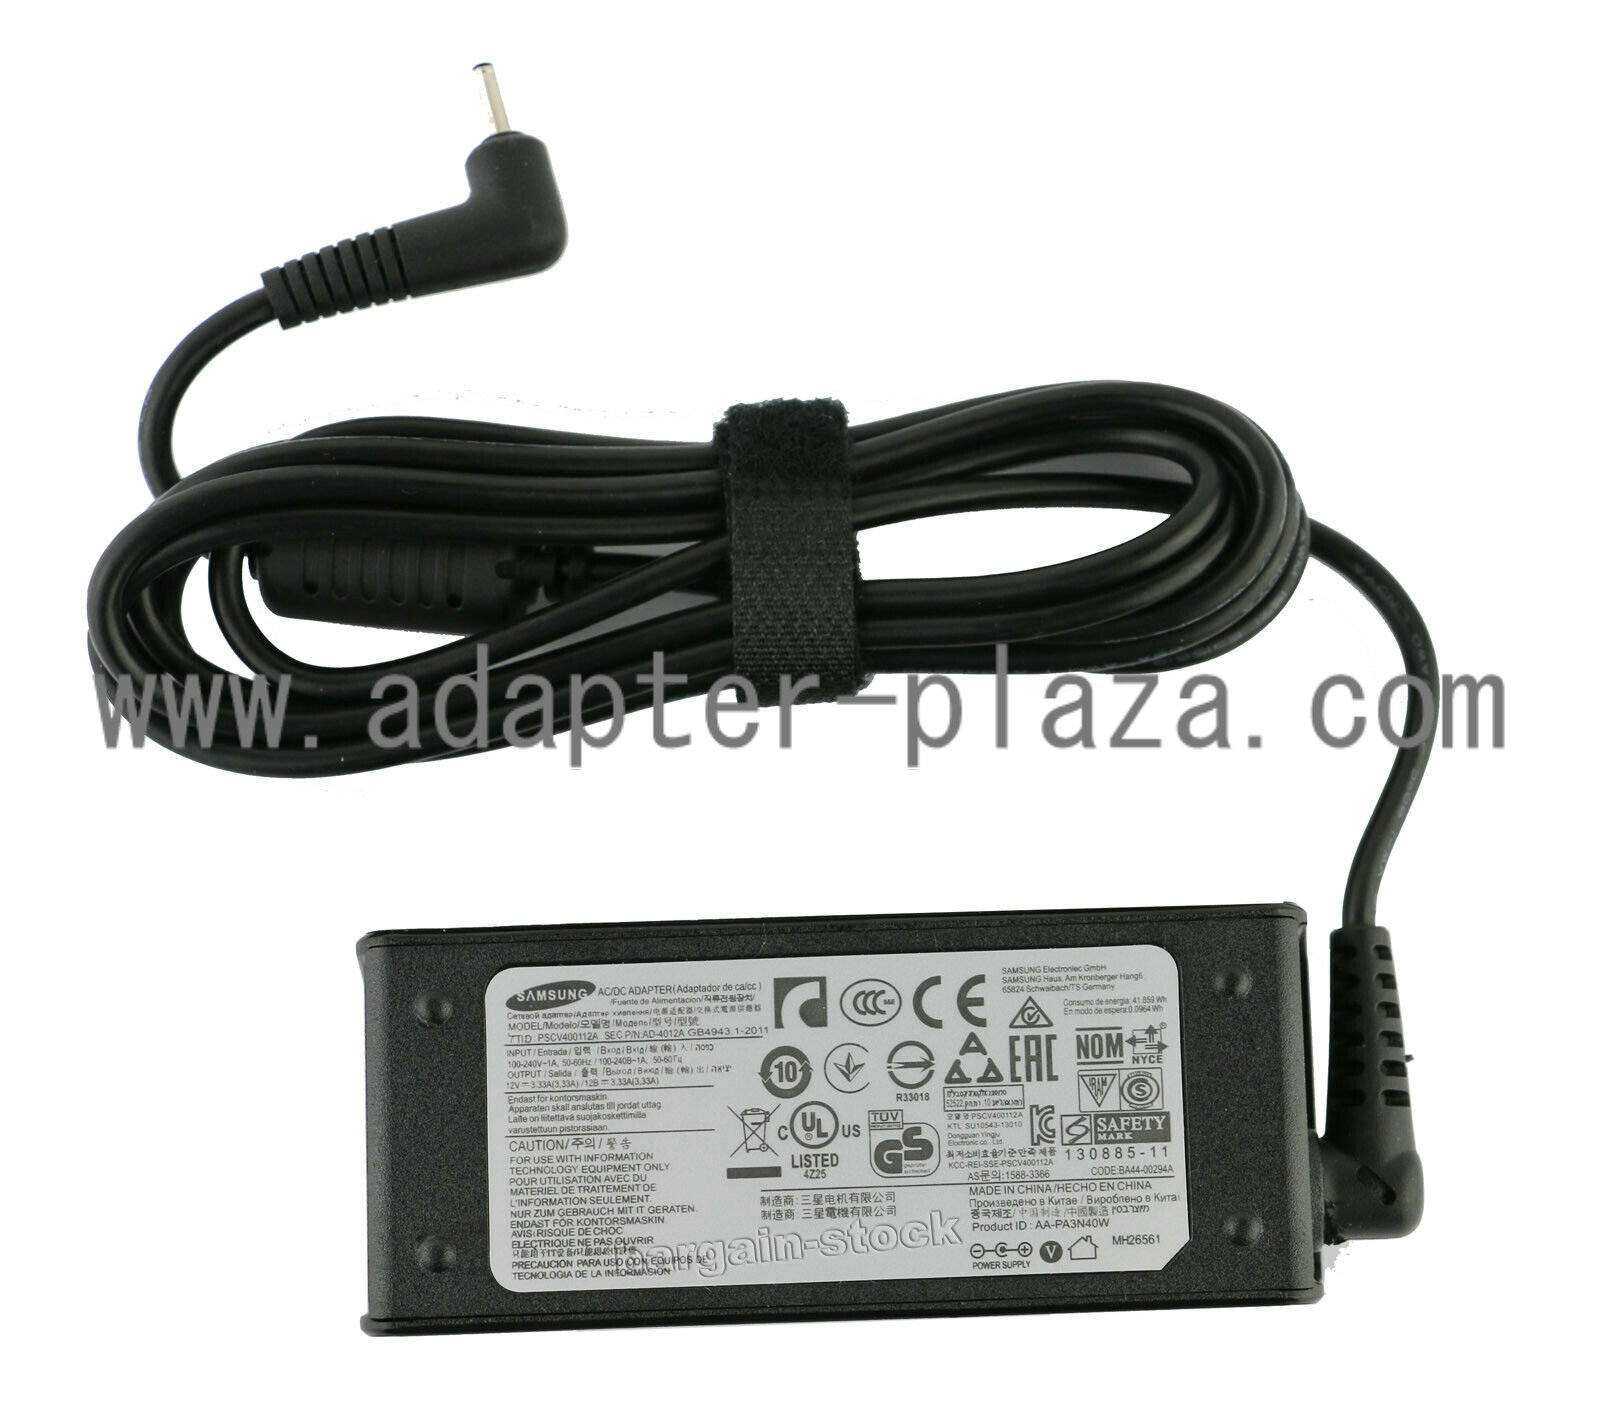 New ZF120A-120220 AC Adapter FOR Samsung chromebook XE501C13-K01US AC Adapter 2.5*0.7mm Barrel Tip